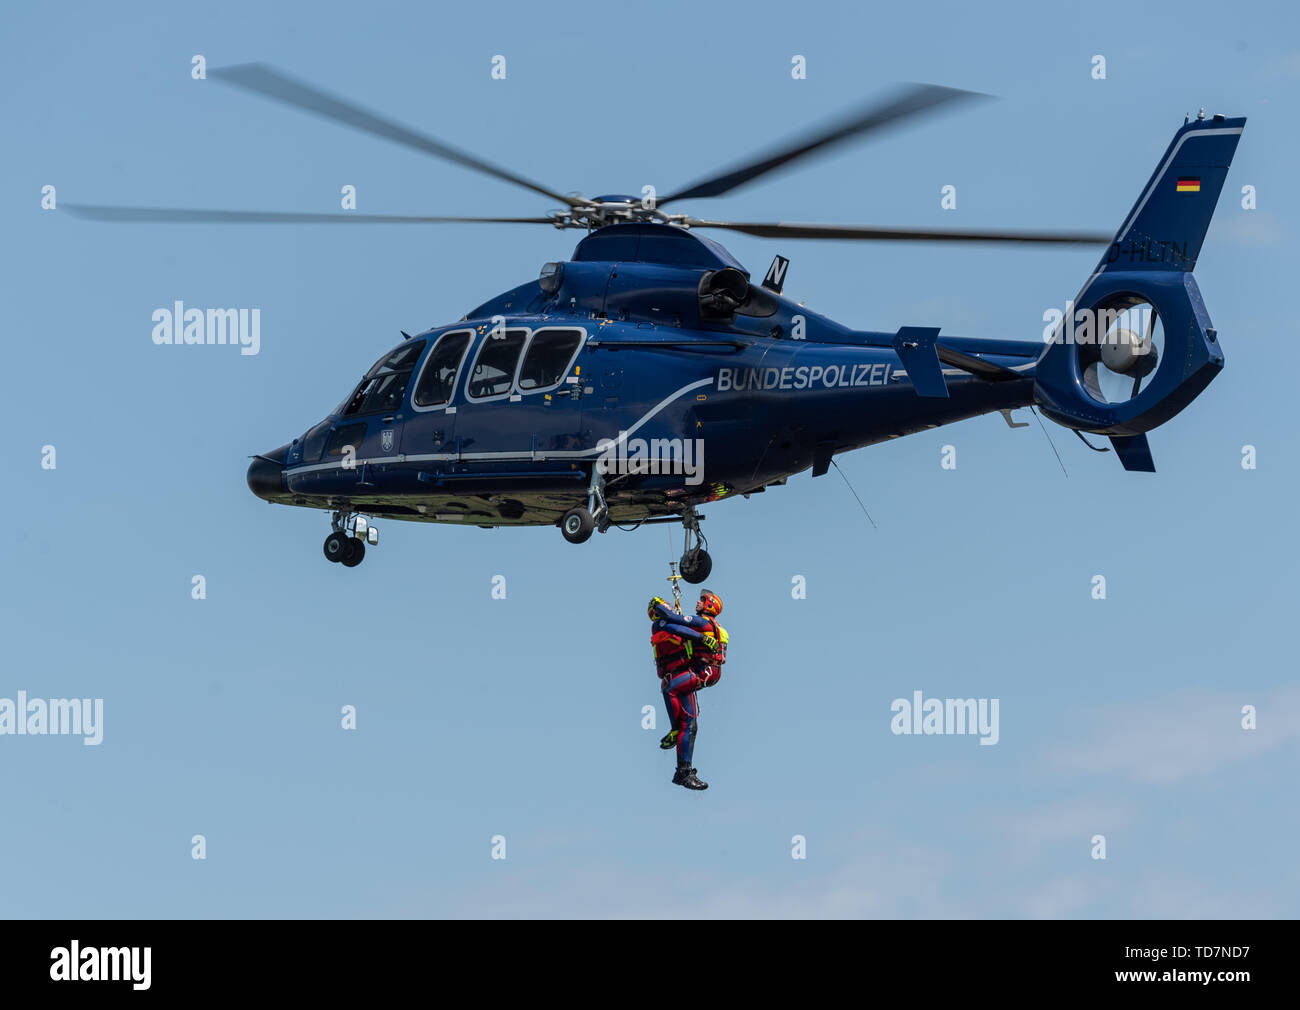 13 June 2019, Saxony, Nünchritz: Air rescue specialists hang on a rope on an EC 155 b1 helicopter during an exercise in helicopter-assisted water rescue from the Elbe. The Bundespolizei-Fliegerstaffel Blumberg, together with the Wasserwacht Sachsen and the Deutsche Lebens-Rettungs-Gesellschaft e.V. (German Life and Rescue Society), leads the (DLRG) is conducting a joint exercise to rescue people from flowing waters. Photo: Robert Michael/dpa-Zentralbild/dpa Stock Photo